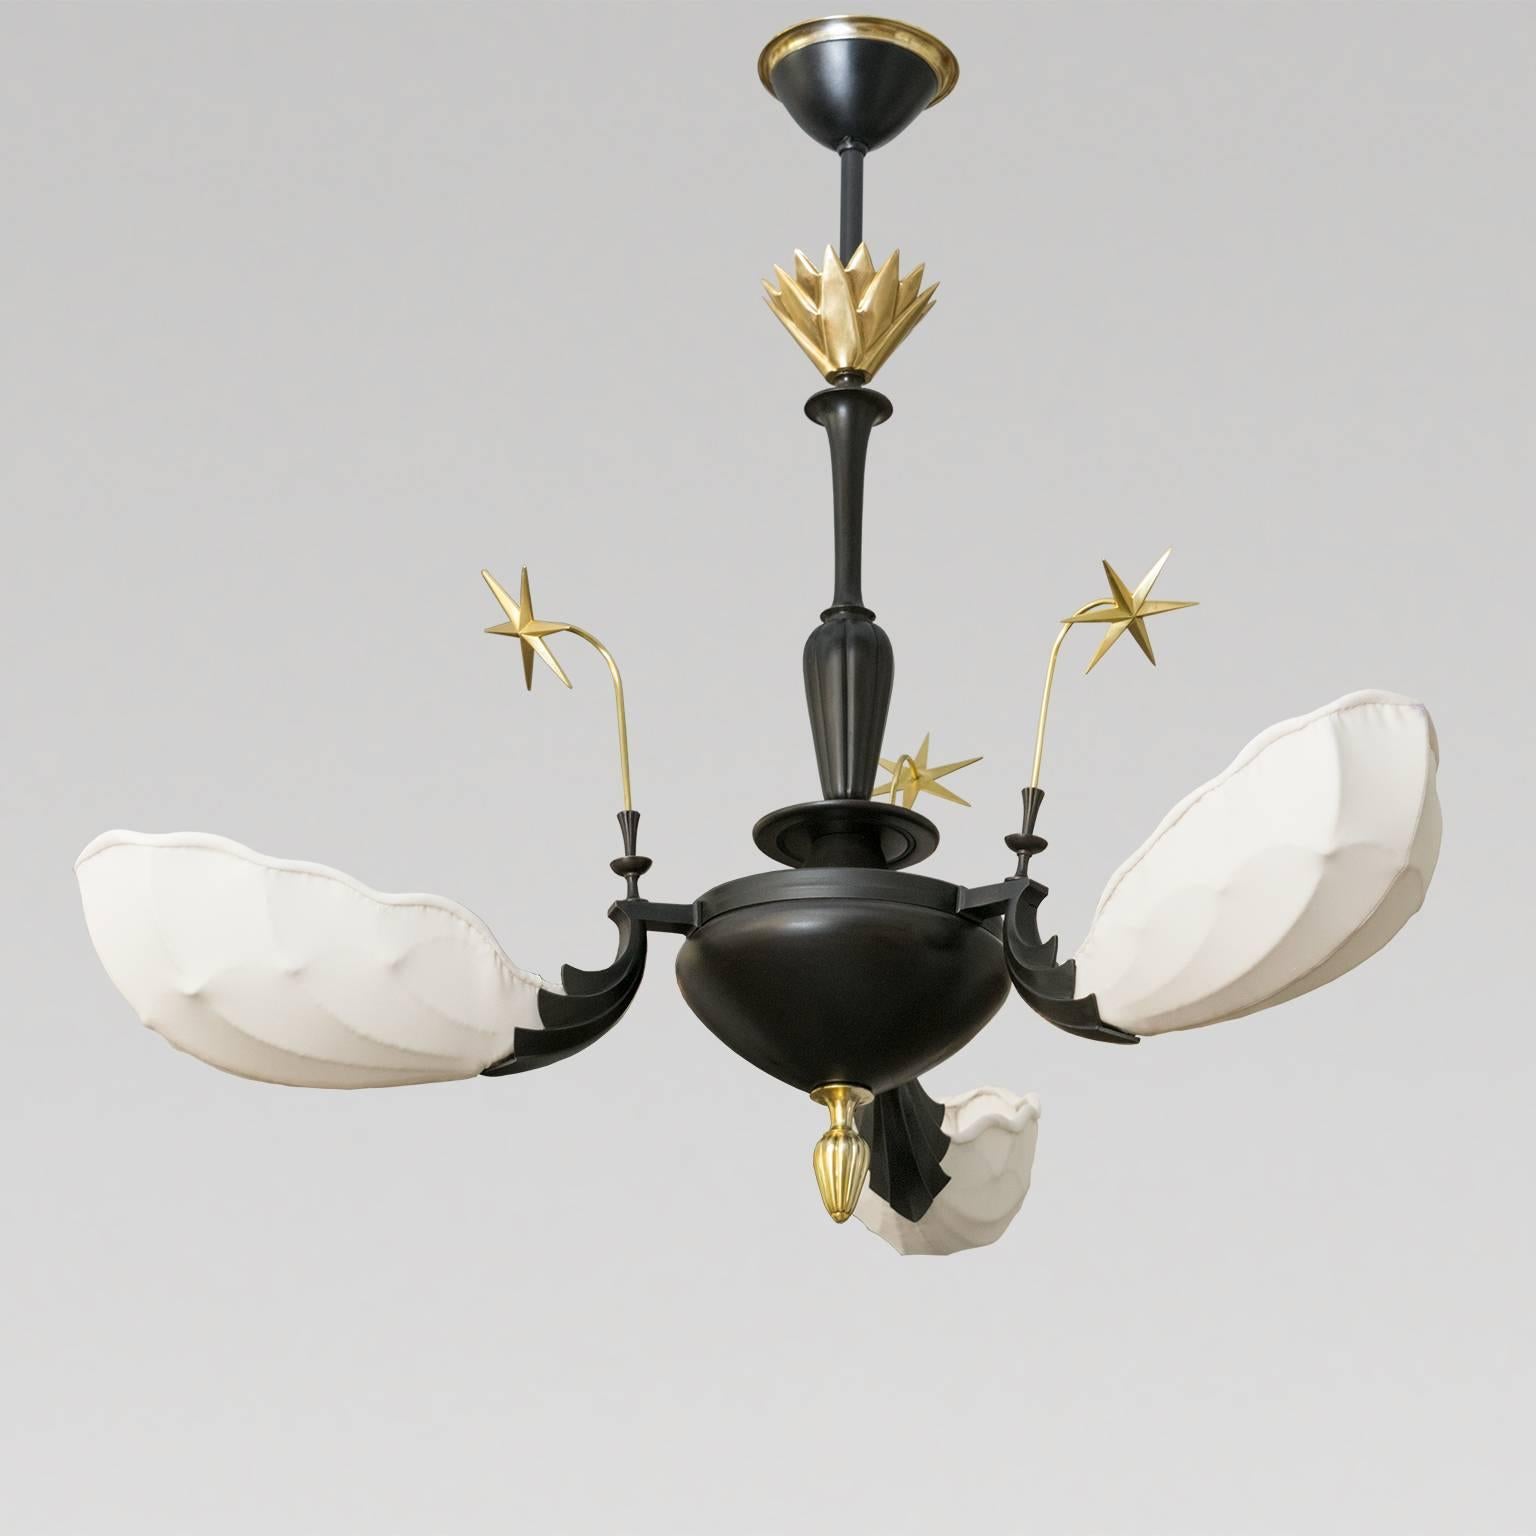 A very special Scandinavian Modern, Swedish grace pendant light with a deeply patinated brass frame detailed with polish brass elements which include stars, a finial and crown. Each of the three arms holds a shell form shade newly covered in an